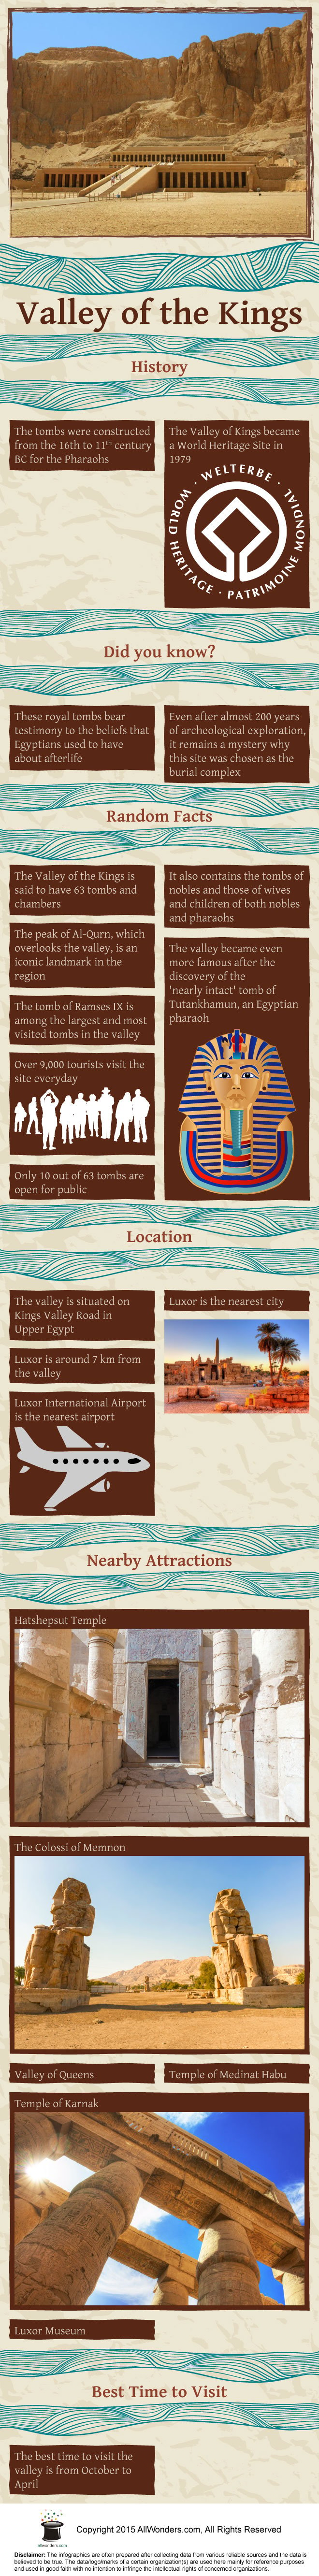 Valley of the Kings Infographic